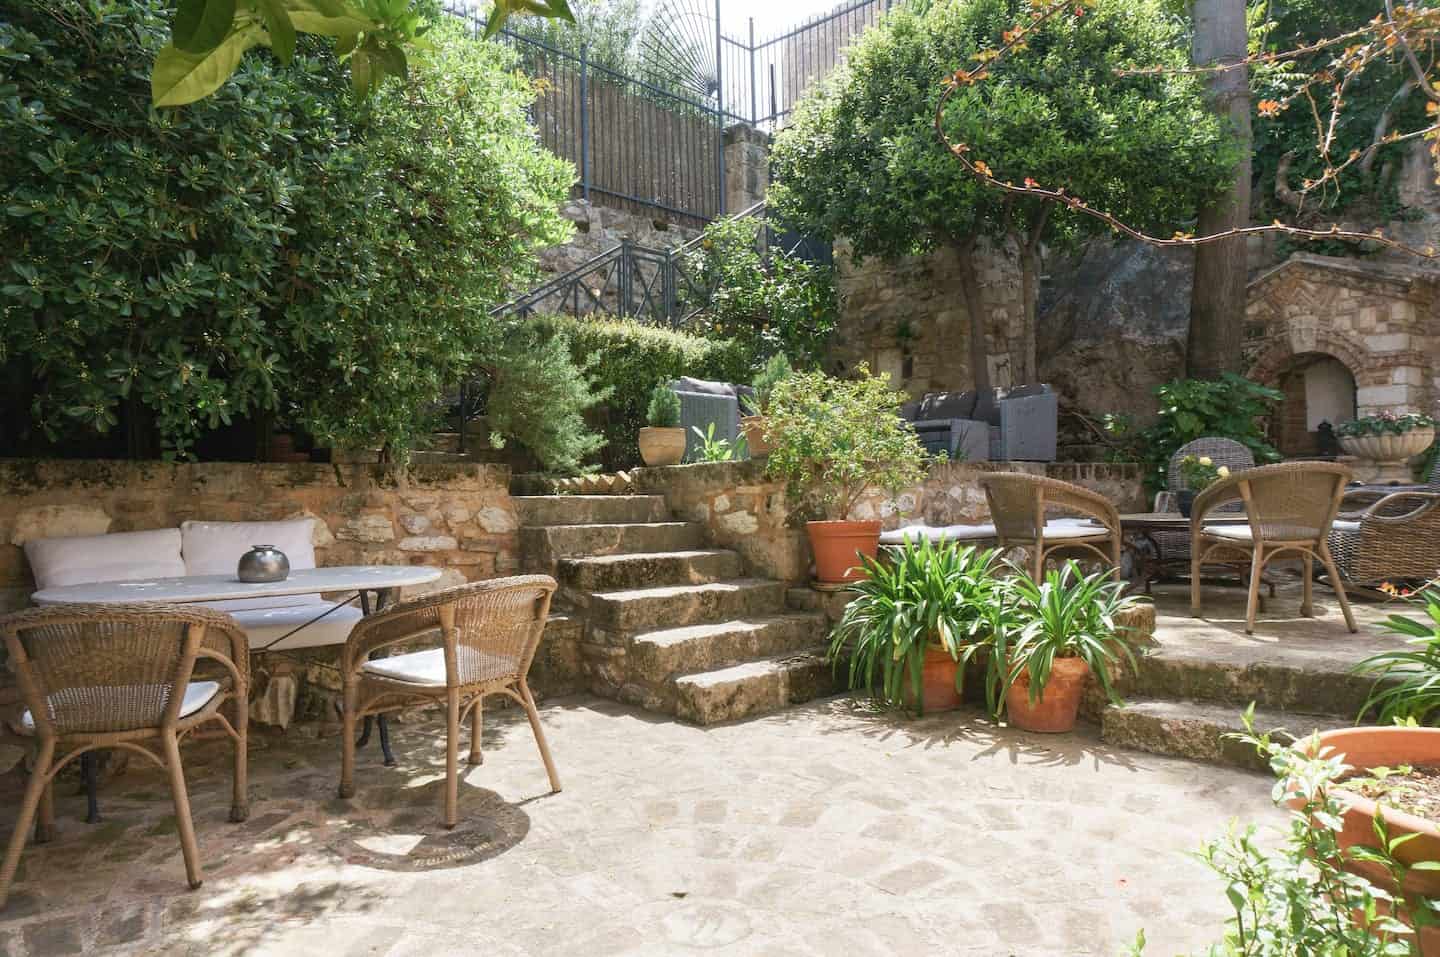 Image of Airbnb rental in Athens, Greece